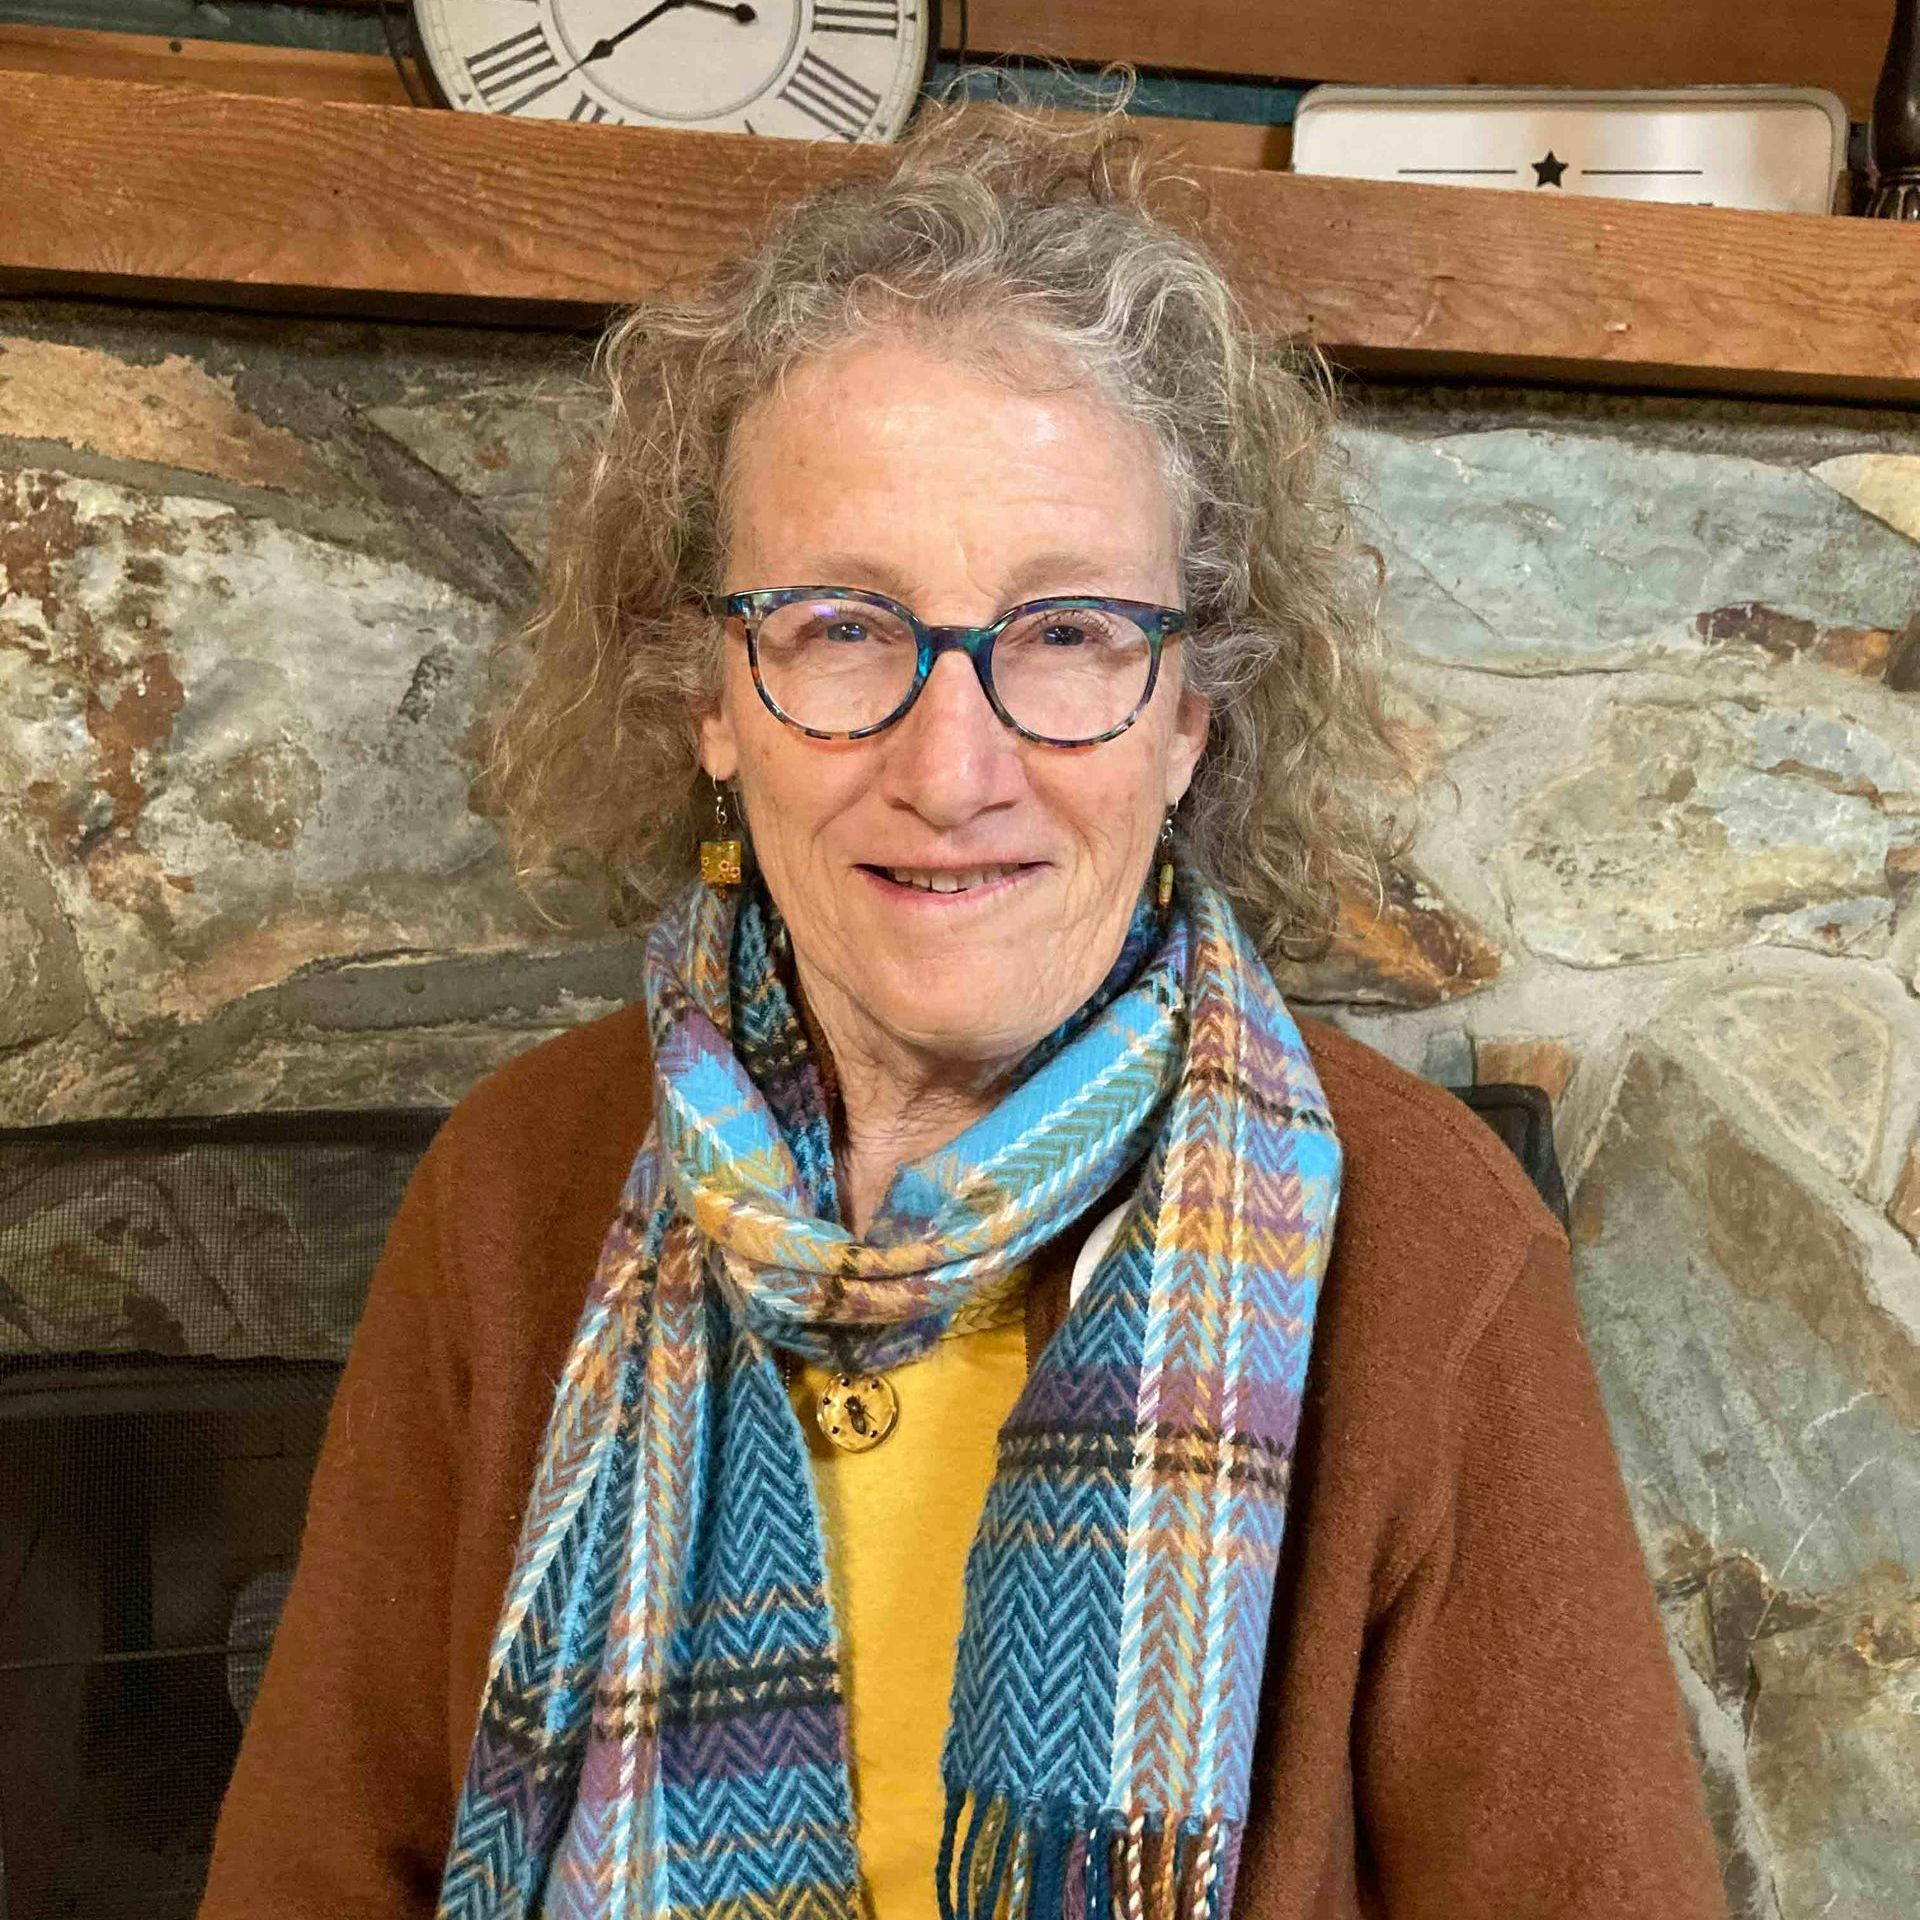 A woman wearing glasses and a scarf is standing in front of a fireplace.